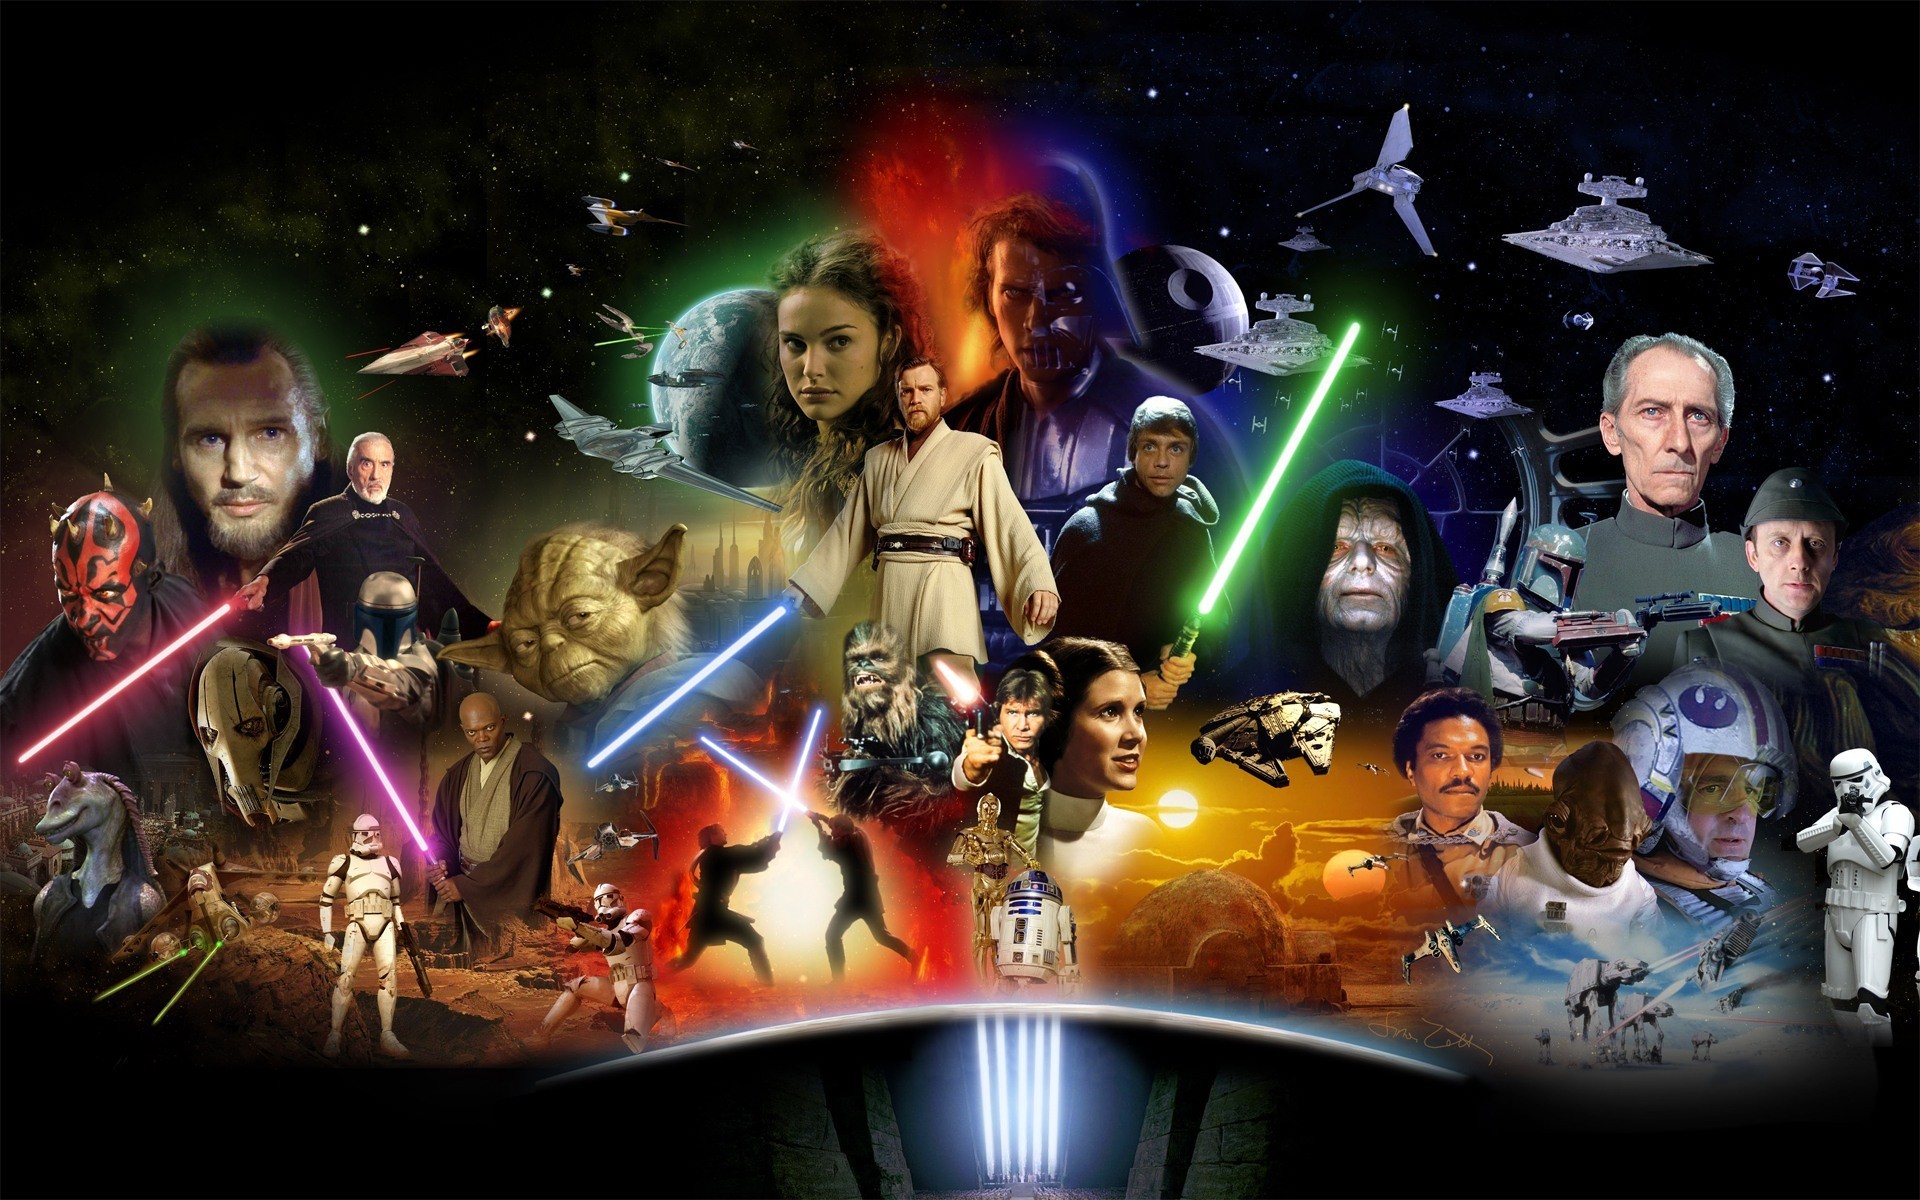 Star wars - four decades of out of this world action